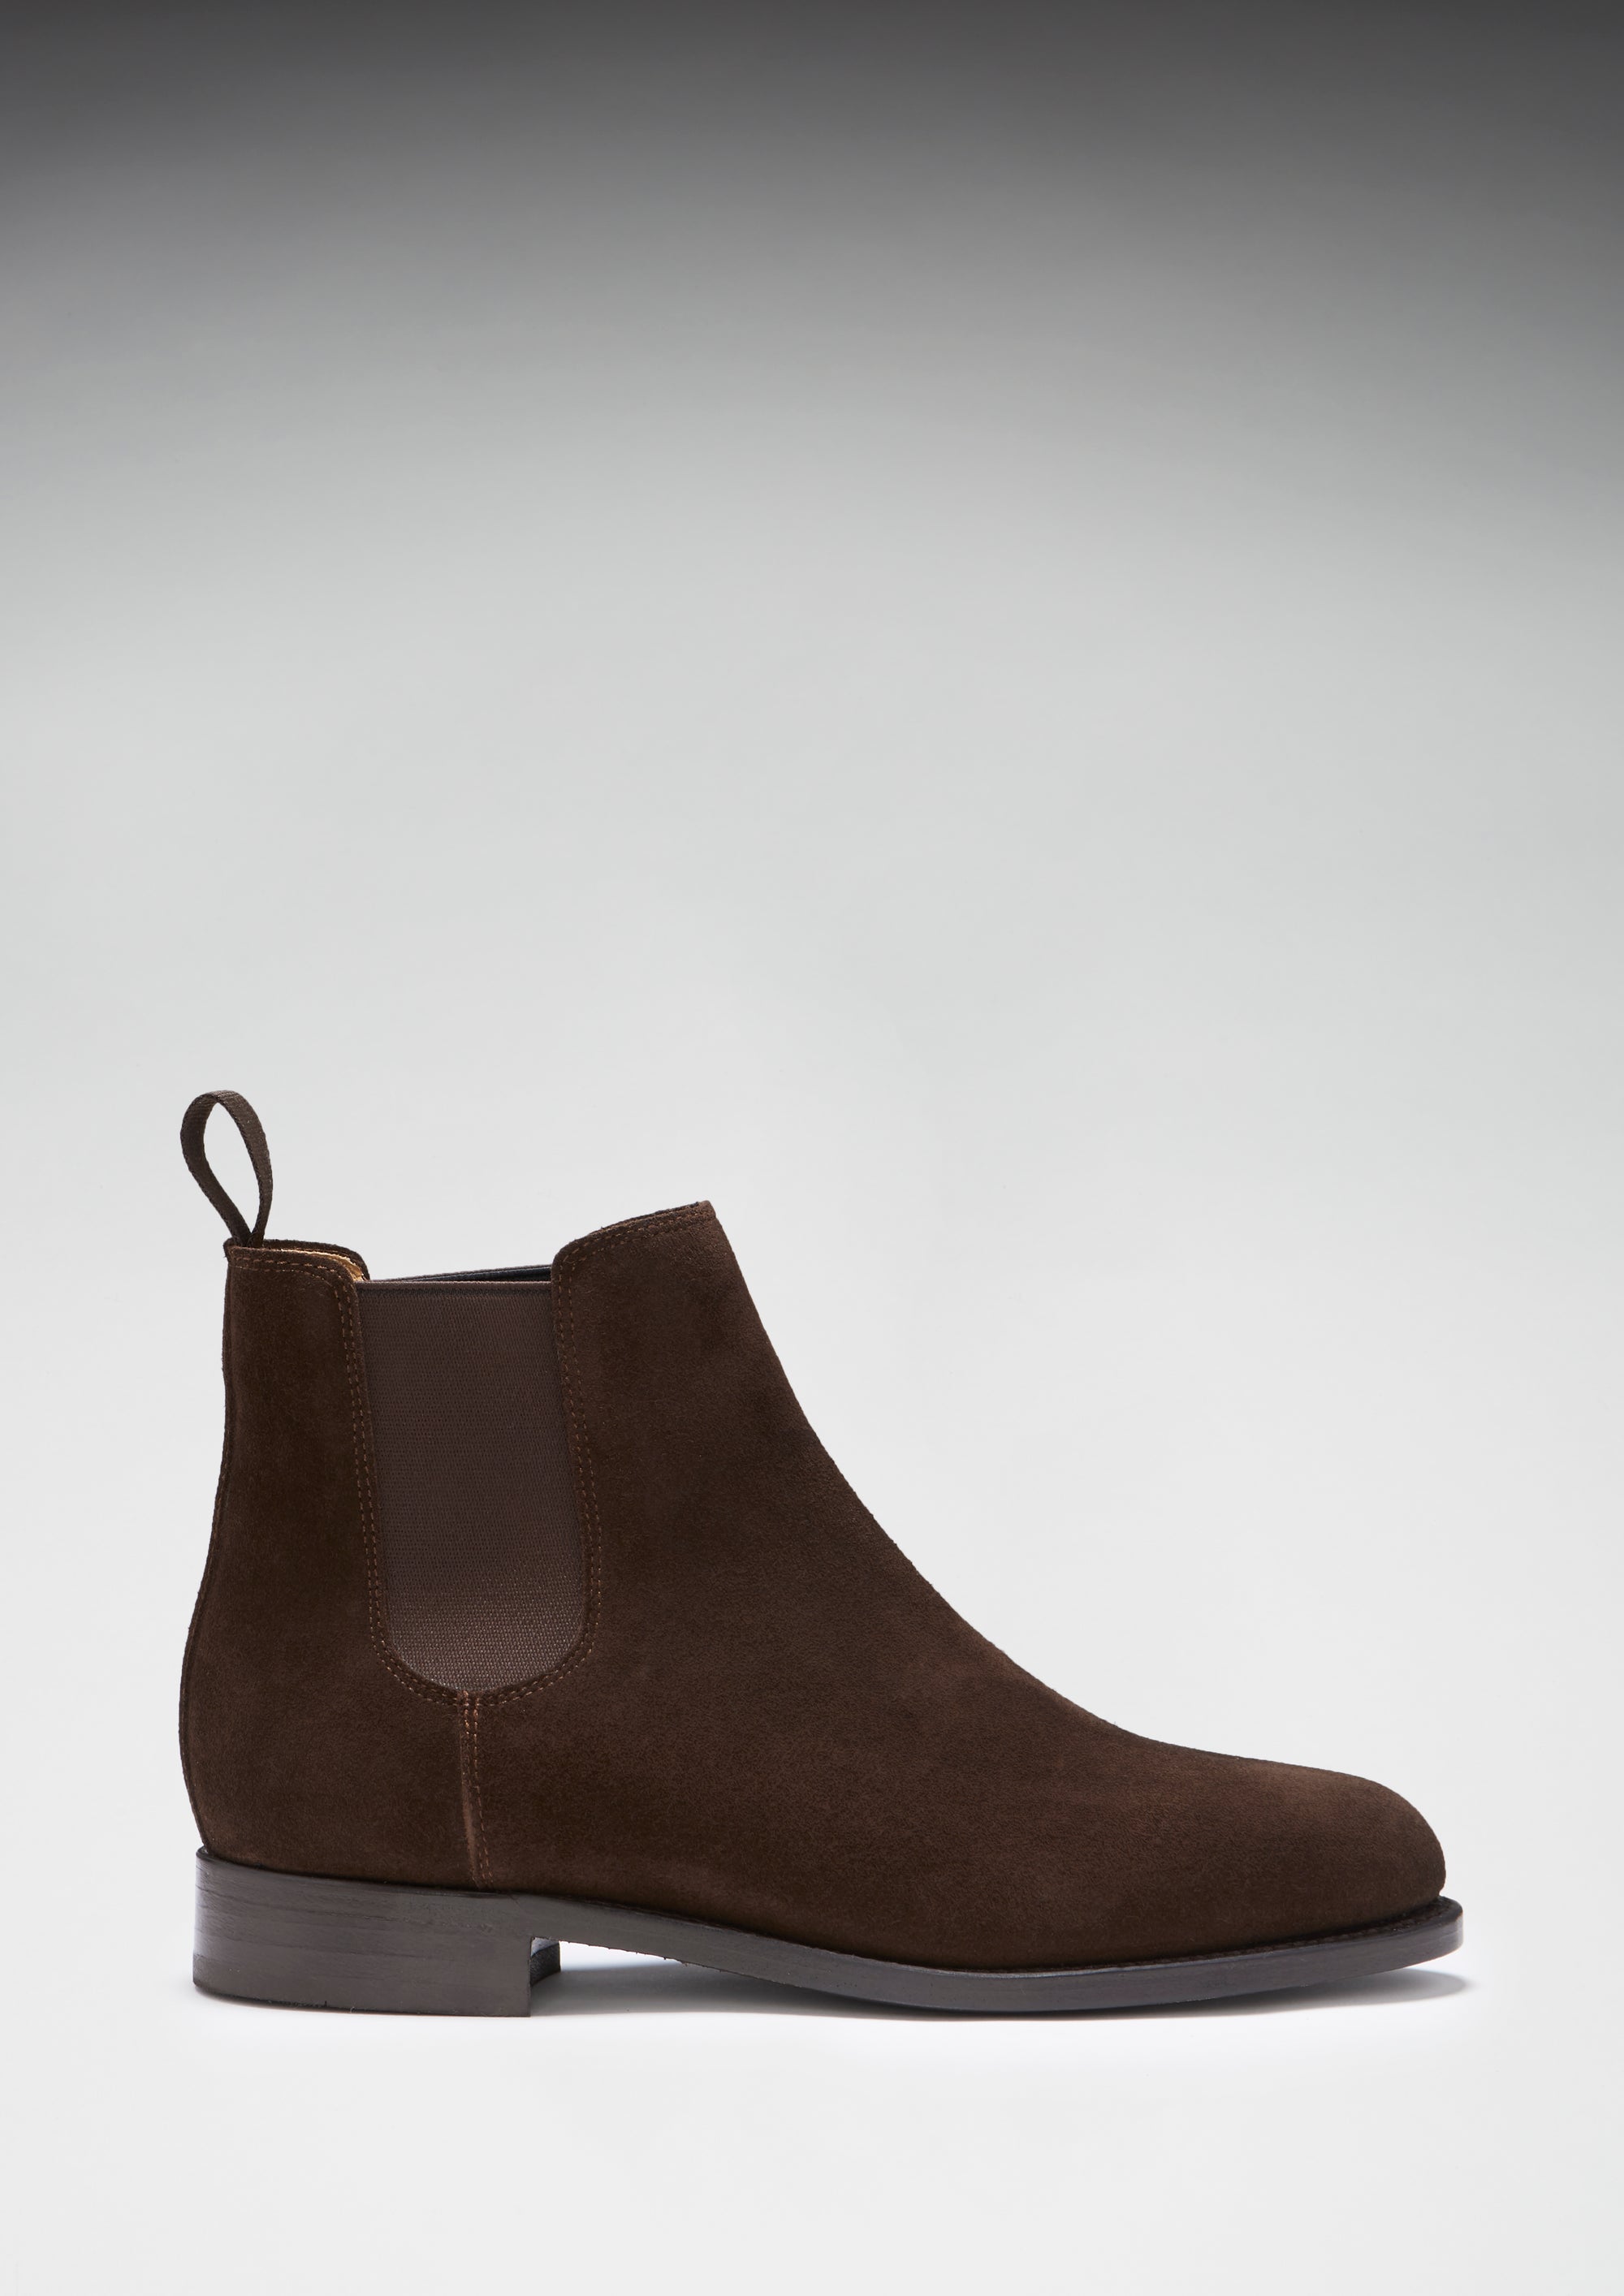 Women's Brown Suede Chelsea Boots, Welted Leather Sole - Hugs & Co.